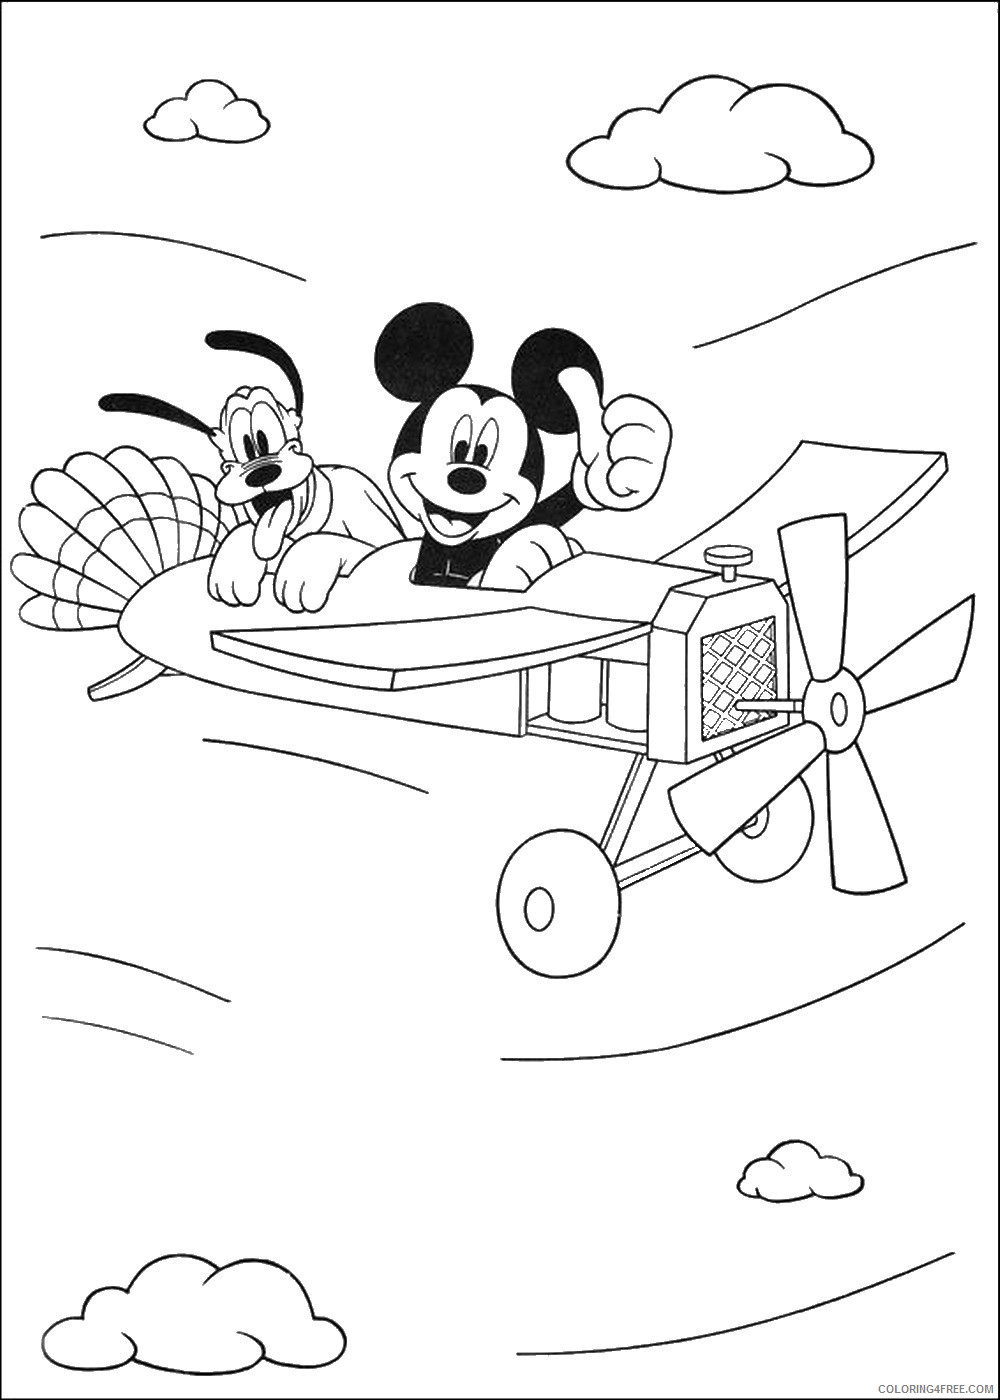 Pluto Coloring Pages Cartoons pluto_cl_38 Printable 2020 4948 Coloring4free